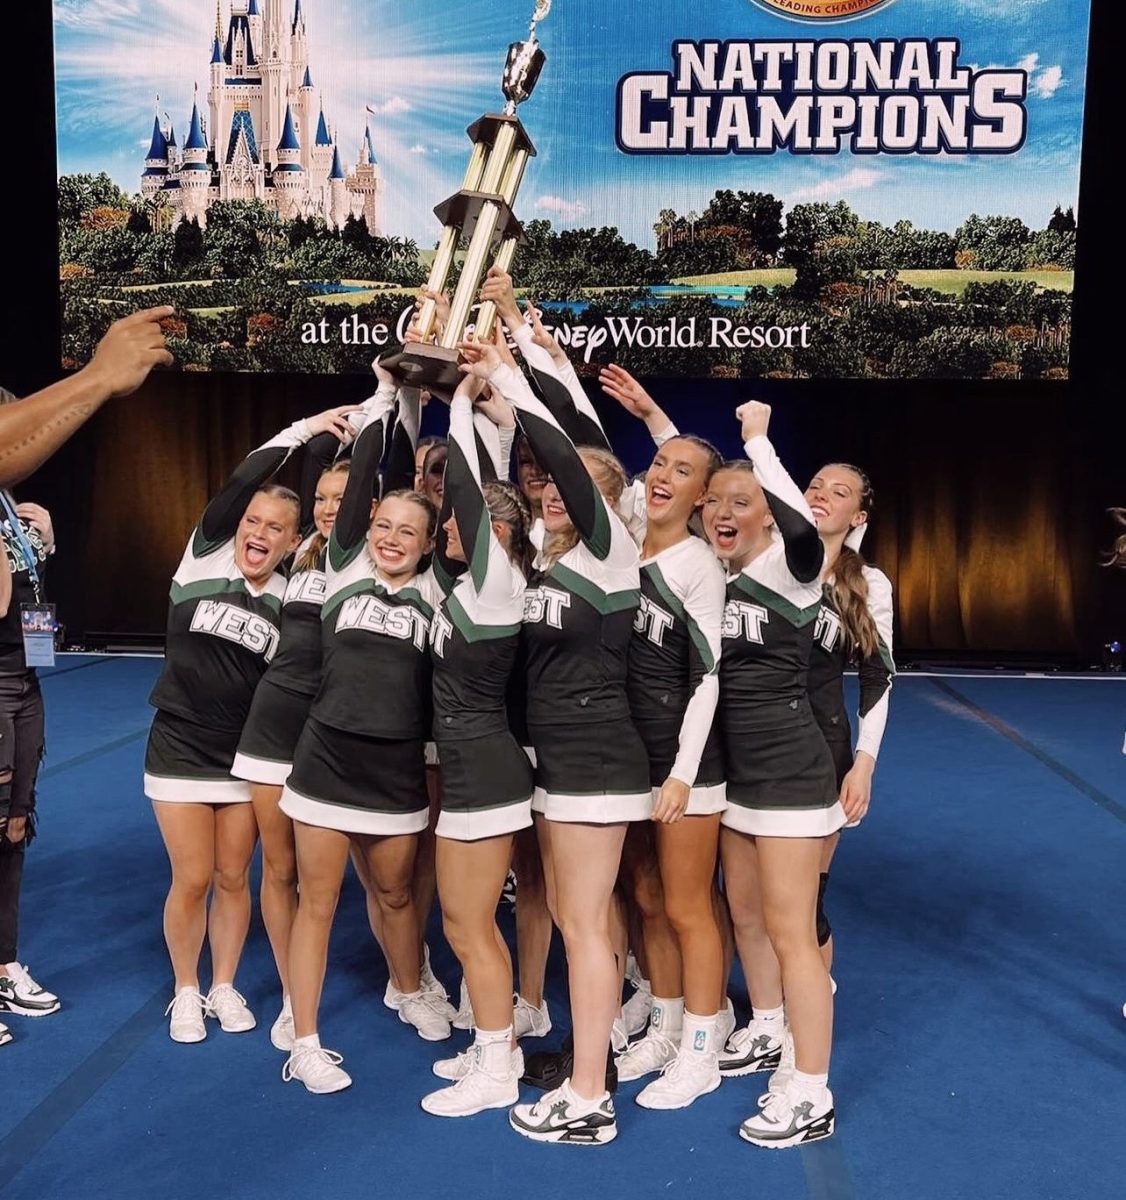 Smiling+with+excitement%2C+senior+Haili+Foster+celebrates+with+her+teammates+after+winning+their+second+first+place+trophy+at+Nationals.+Foster+has+been+on+MWVC+for+four+years+now+and+this+will+be+the+first+time+in+history+that+they+will+be+leaving+with+not+only+one+but+two+white+jackets.+%E2%80%9DThis+truly+was+a+dream+come+true%2C%E2%80%9C+Foster+said.+%E2%80%9CAll+season+long+we+have+been+working+day+in+and+day+out+for+this+moment.+Hearing+our+name+called+out+for+first+place+in+Game+Day+and+Tumbling+was+such+an+exciting+and+joy-filled+moment.%E2%80%9D